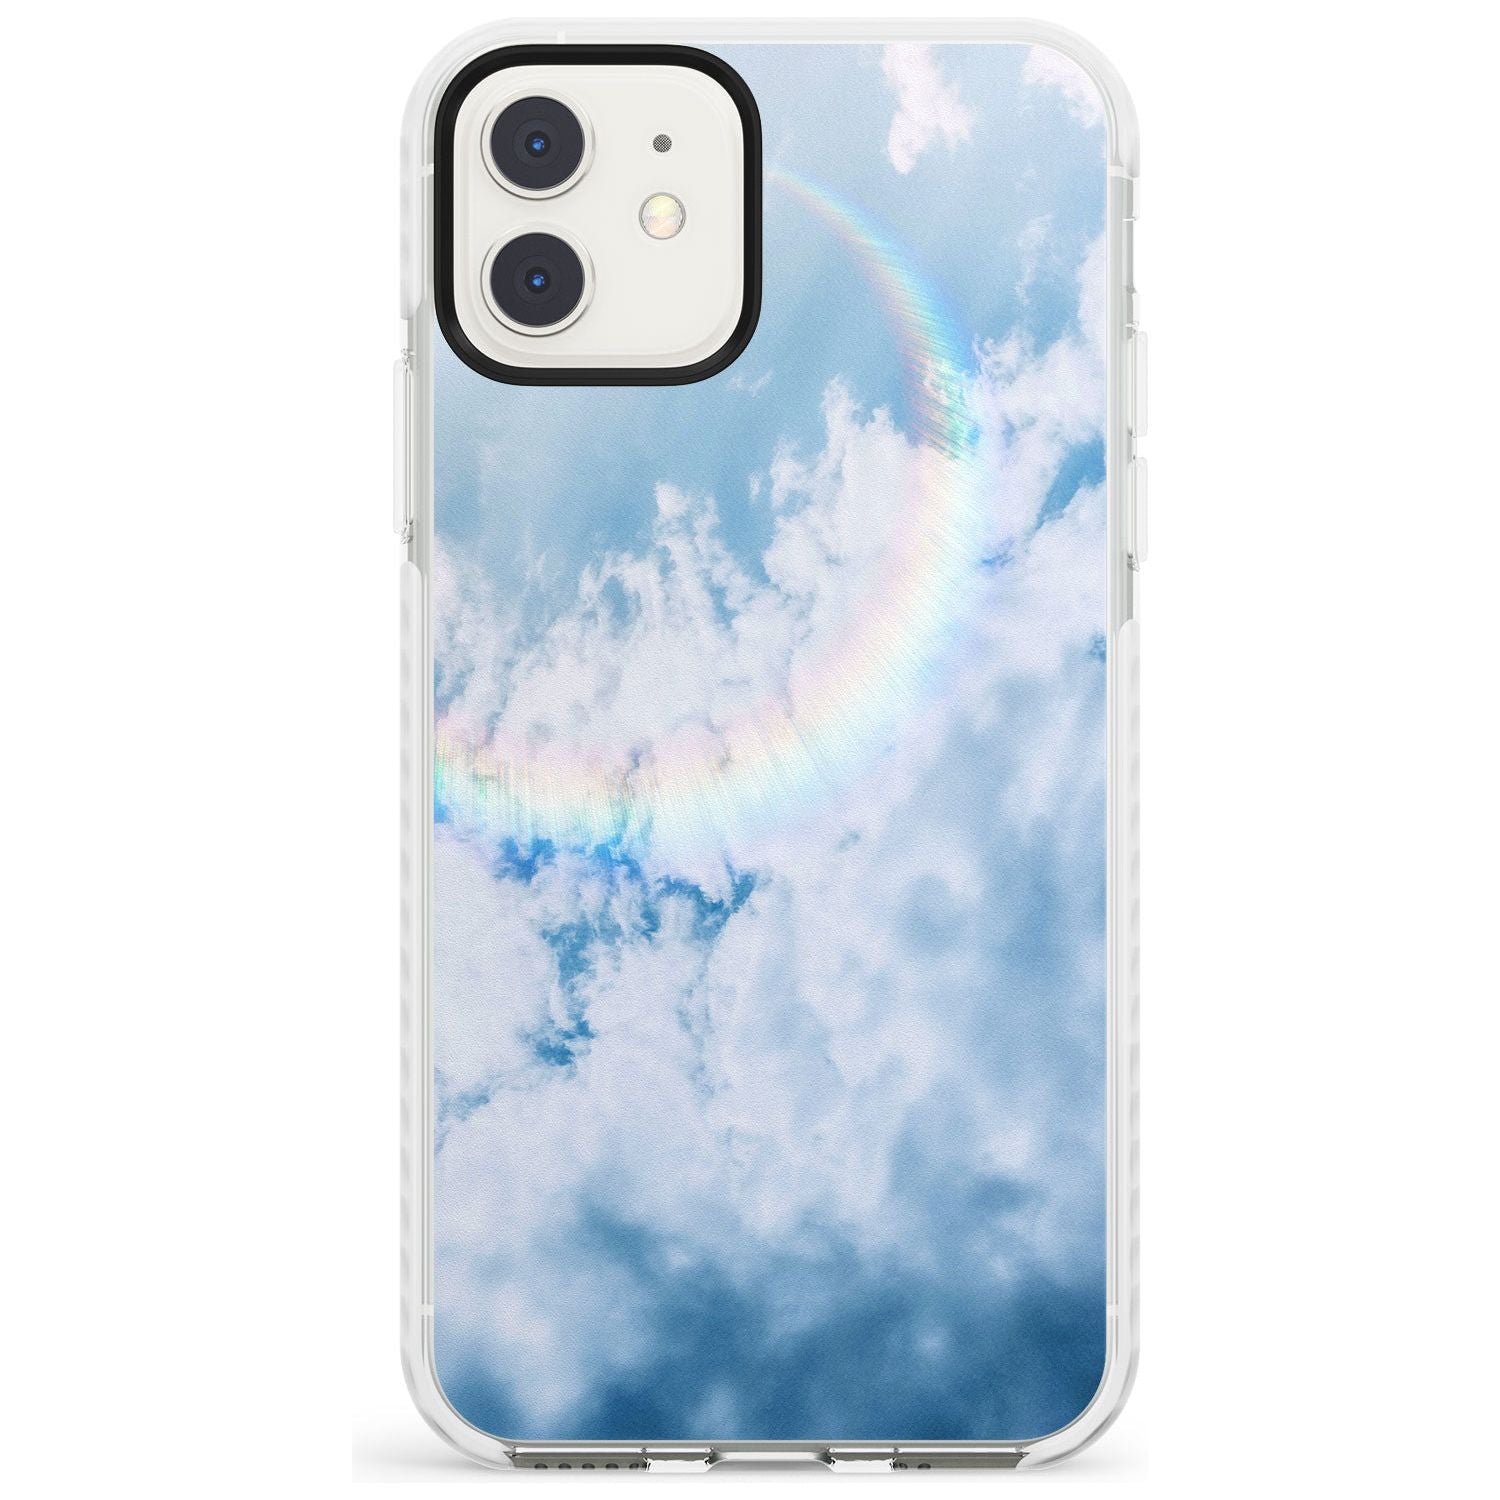 Rainbow Light Flare Photograph Impact Phone Case for iPhone 11